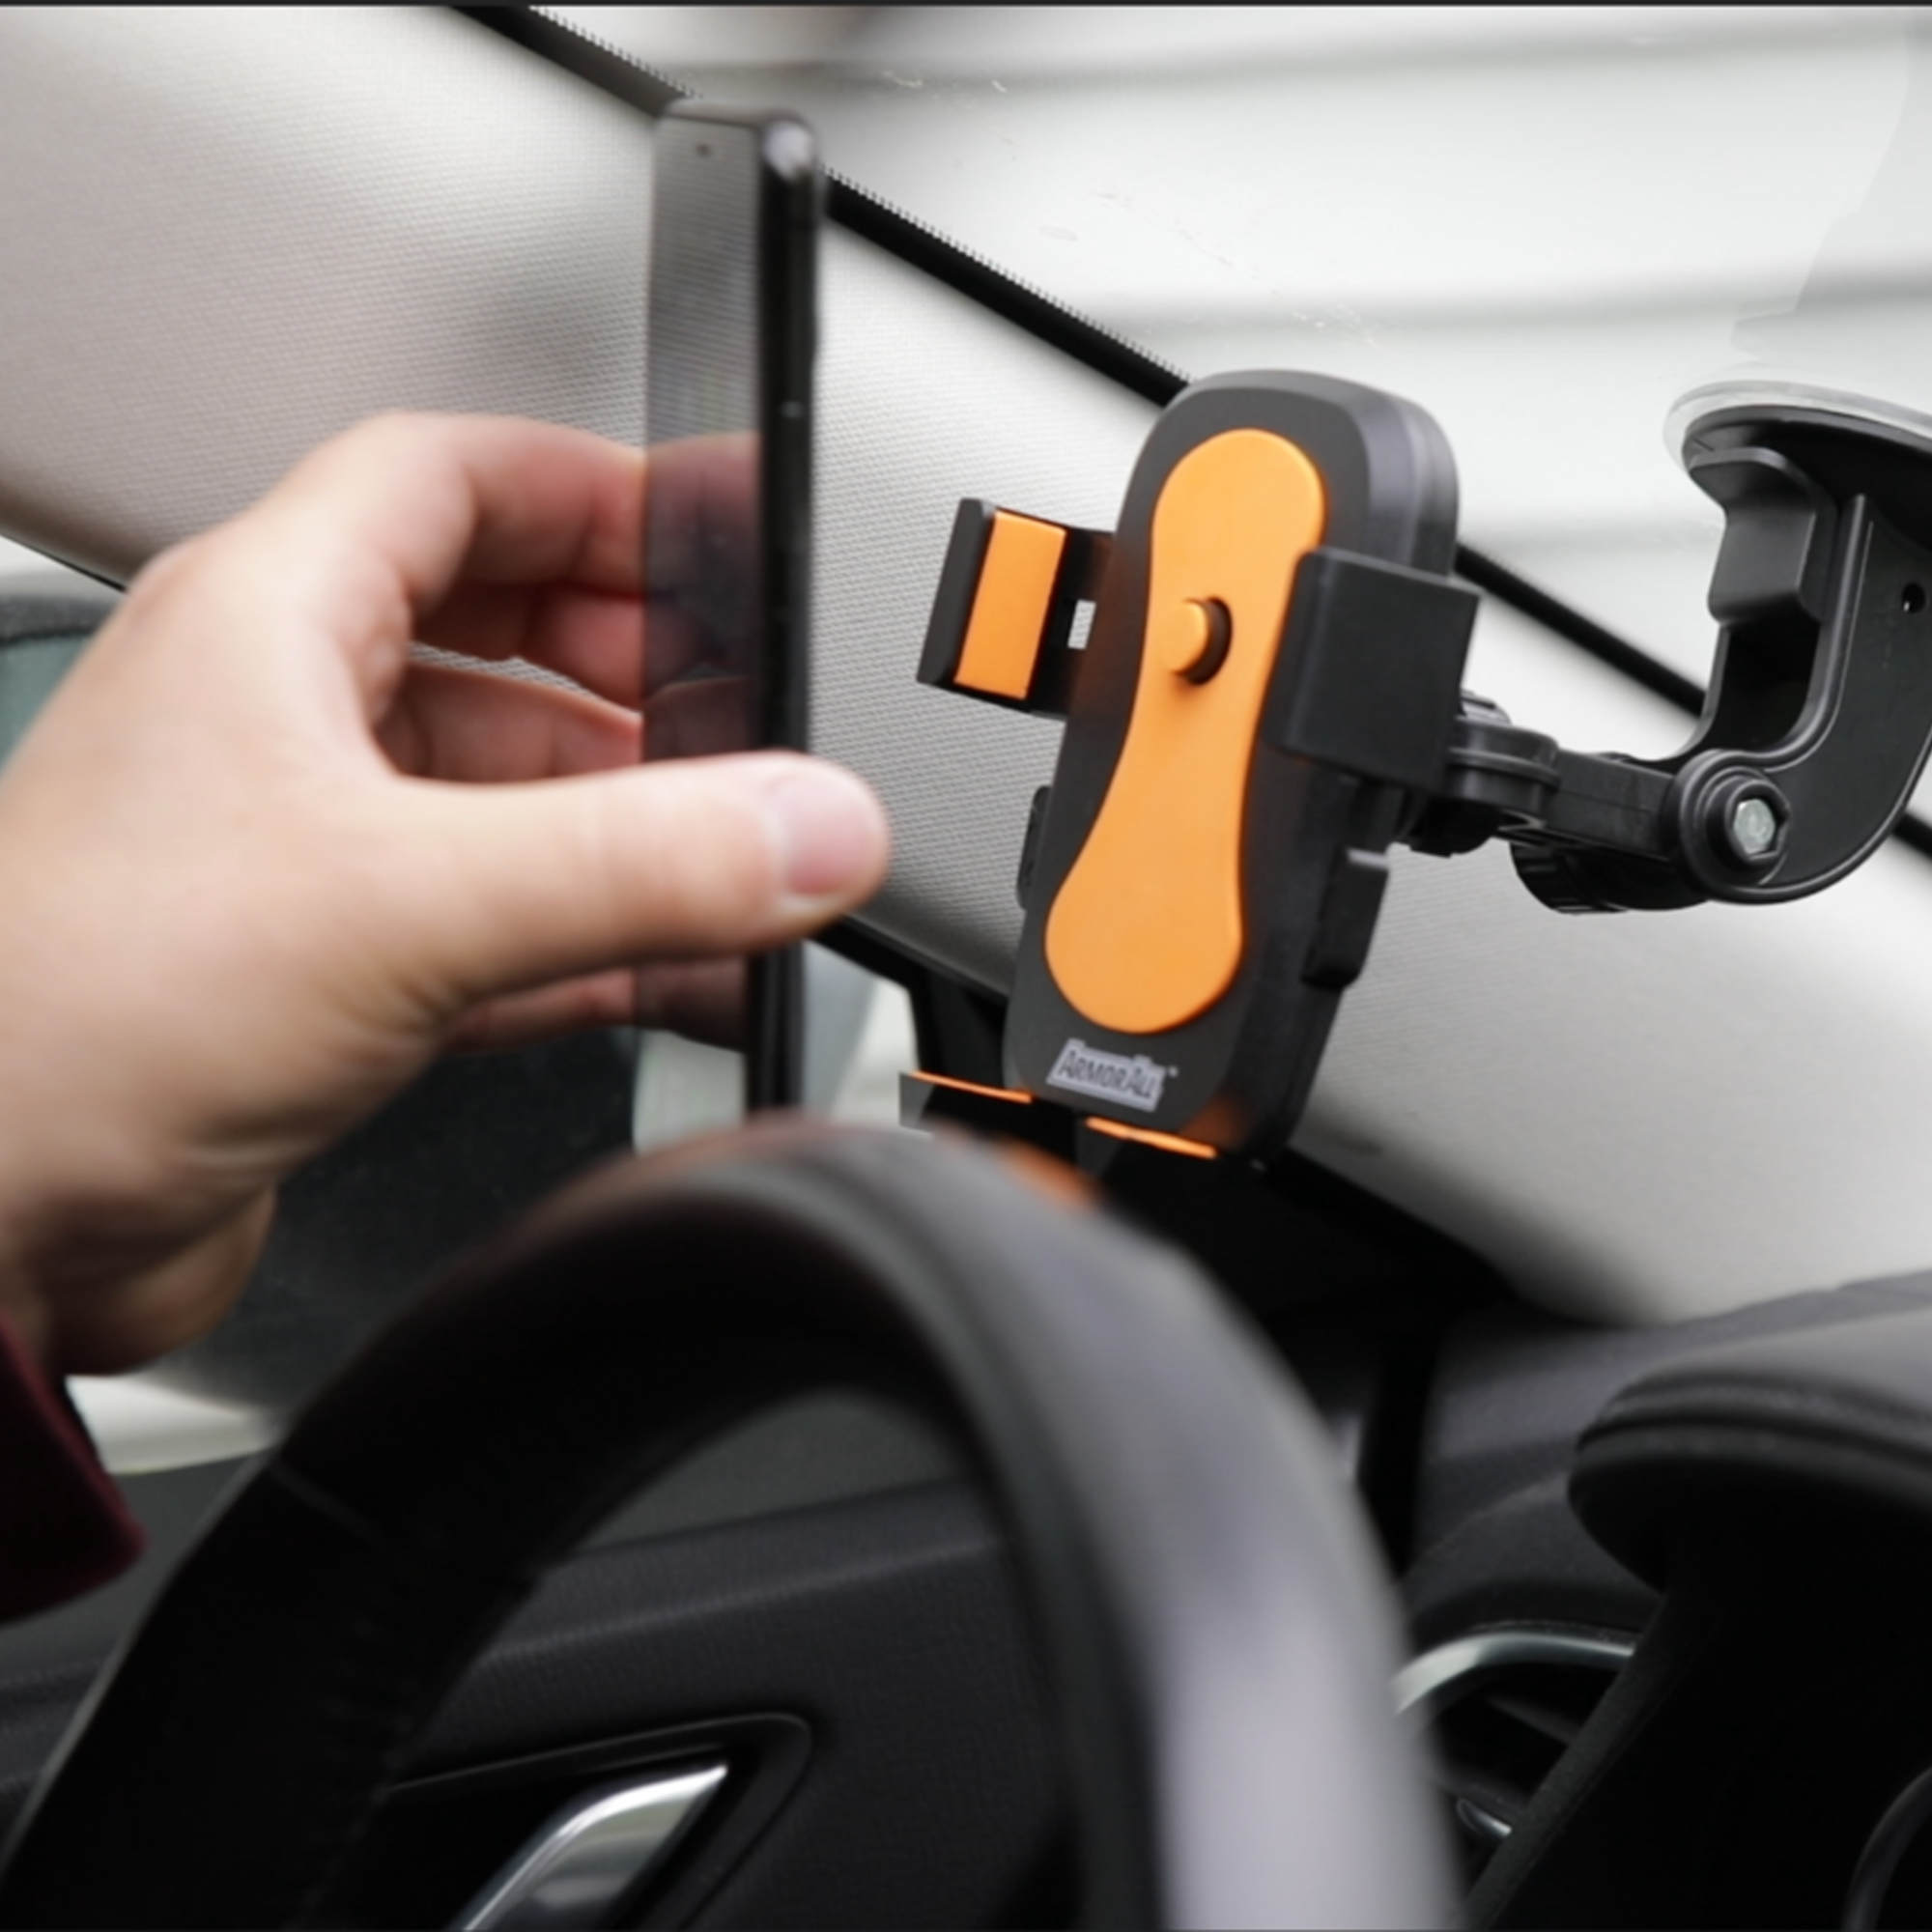 Expandable Arm Suction Mount Phone and GPS Mount - Armor All